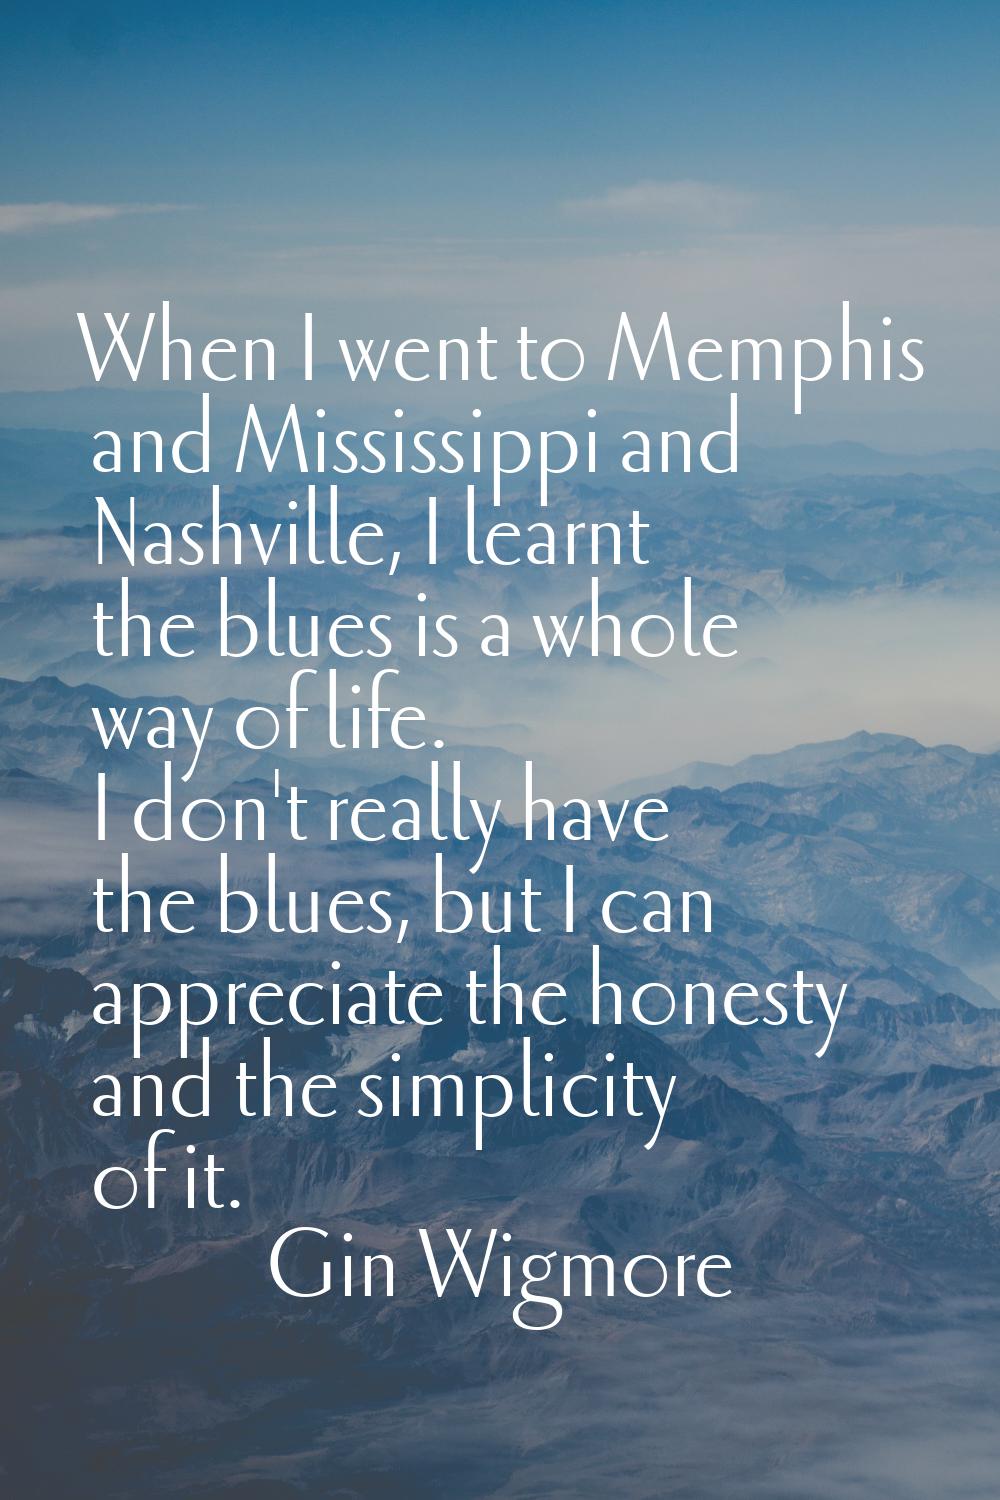 When I went to Memphis and Mississippi and Nashville, I learnt the blues is a whole way of life. I 